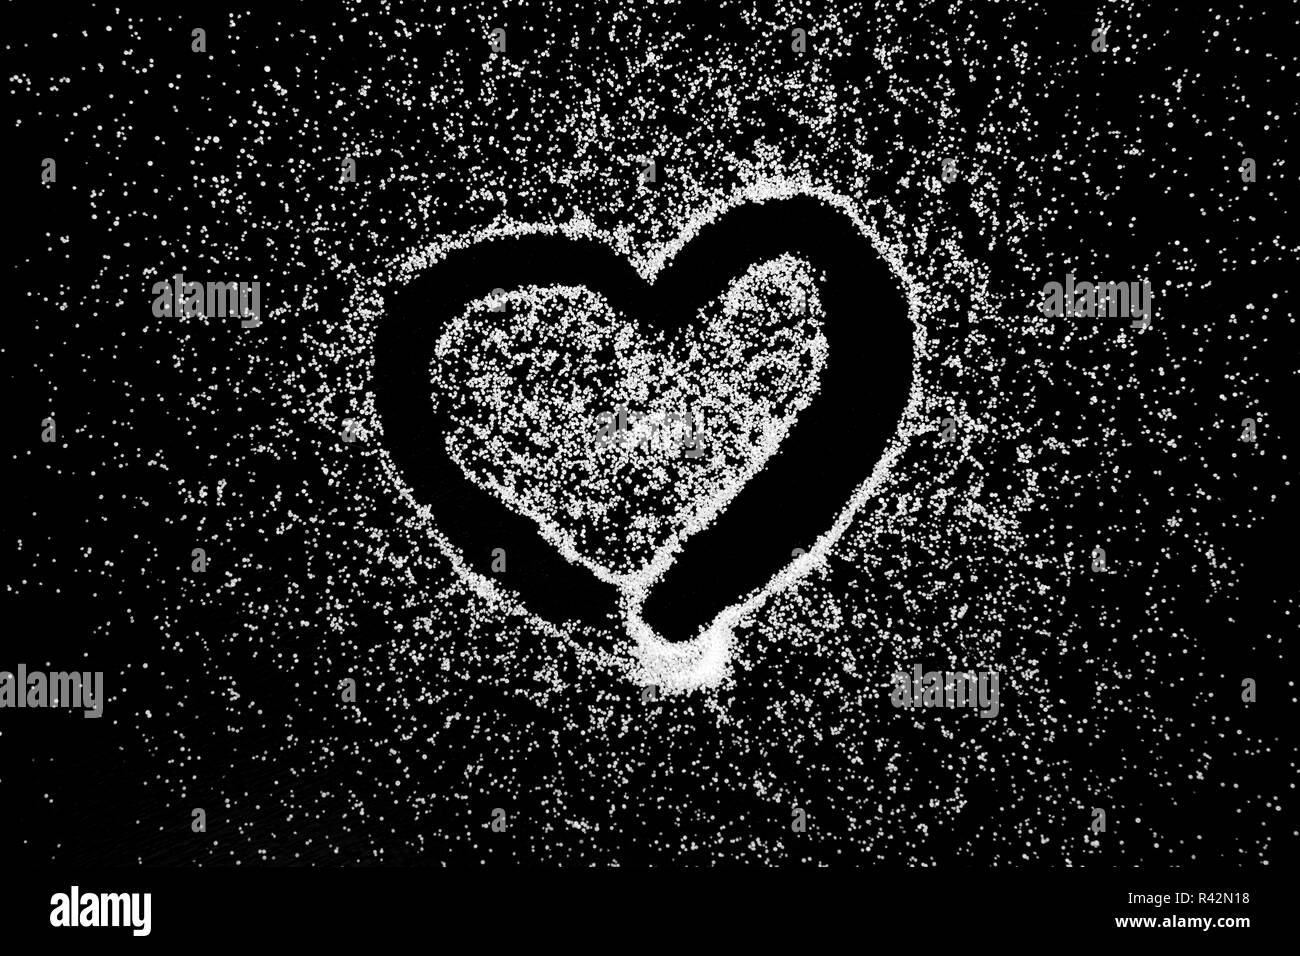 Love heart symbol drawing by finger on white salt powder on black  background. Romantic St. Valentines Day holidays concept with place for  text. Copy s Stock Photo - Alamy